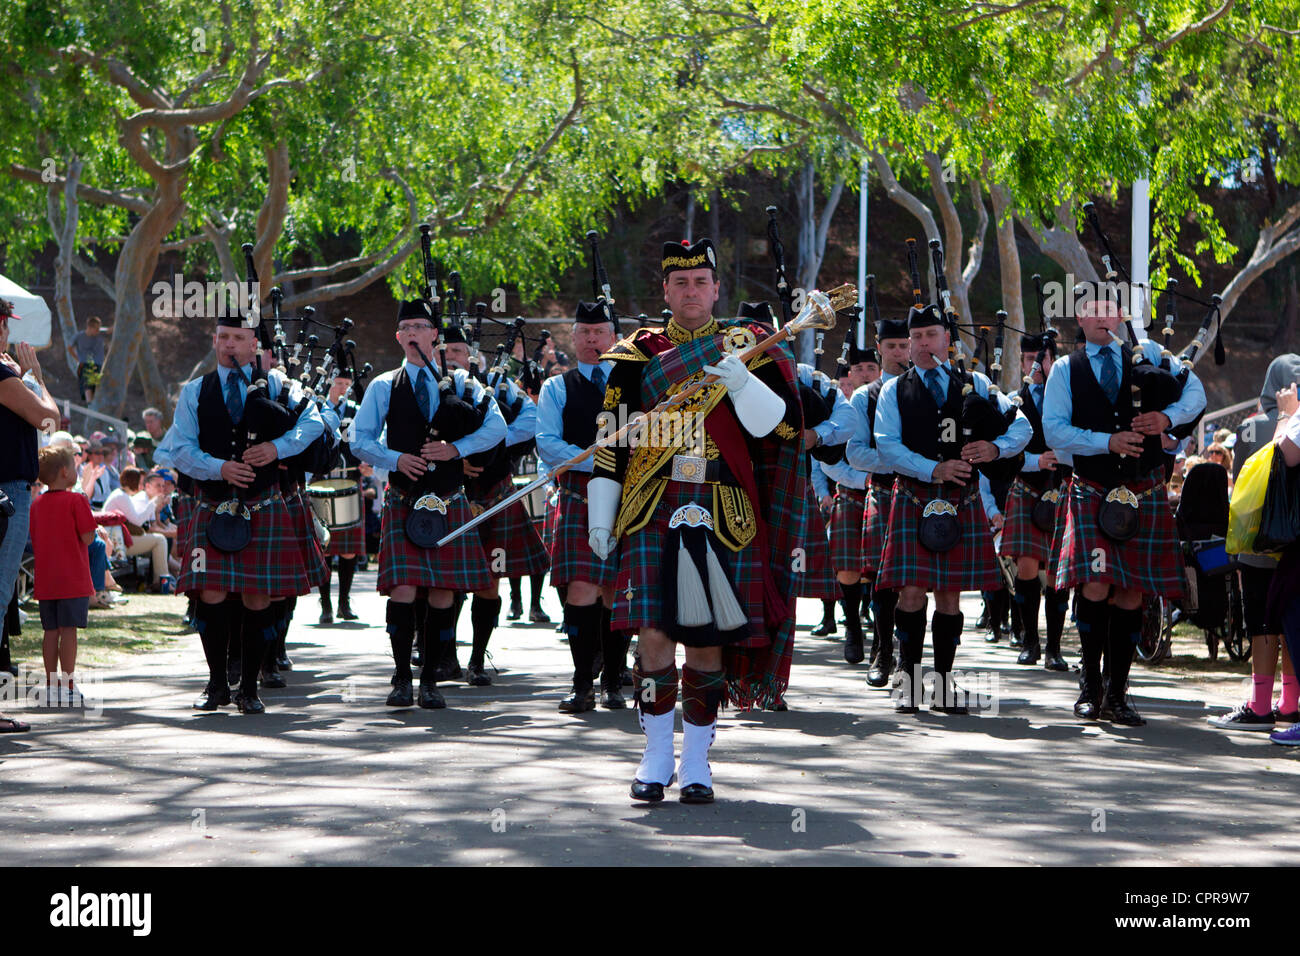 Pipers marching at the American Scottish Festival Costa Mesa California